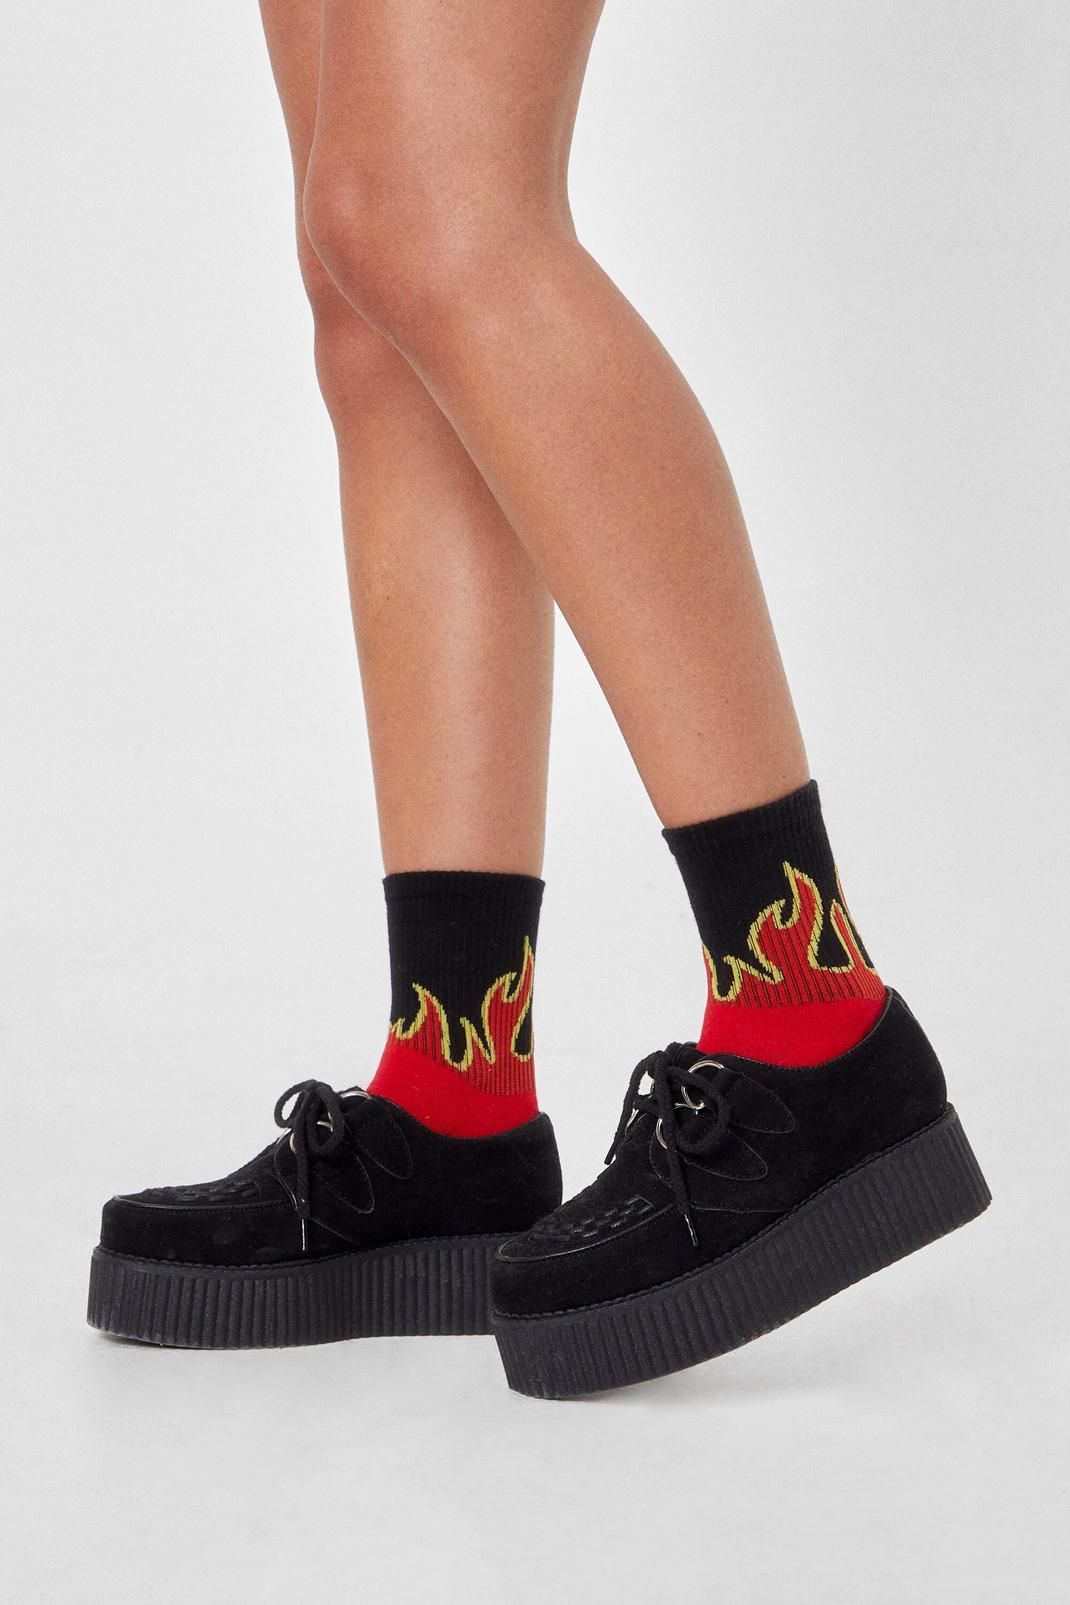 Flame red Blow Their Socks Off Graphic Ankle Socks image number 1